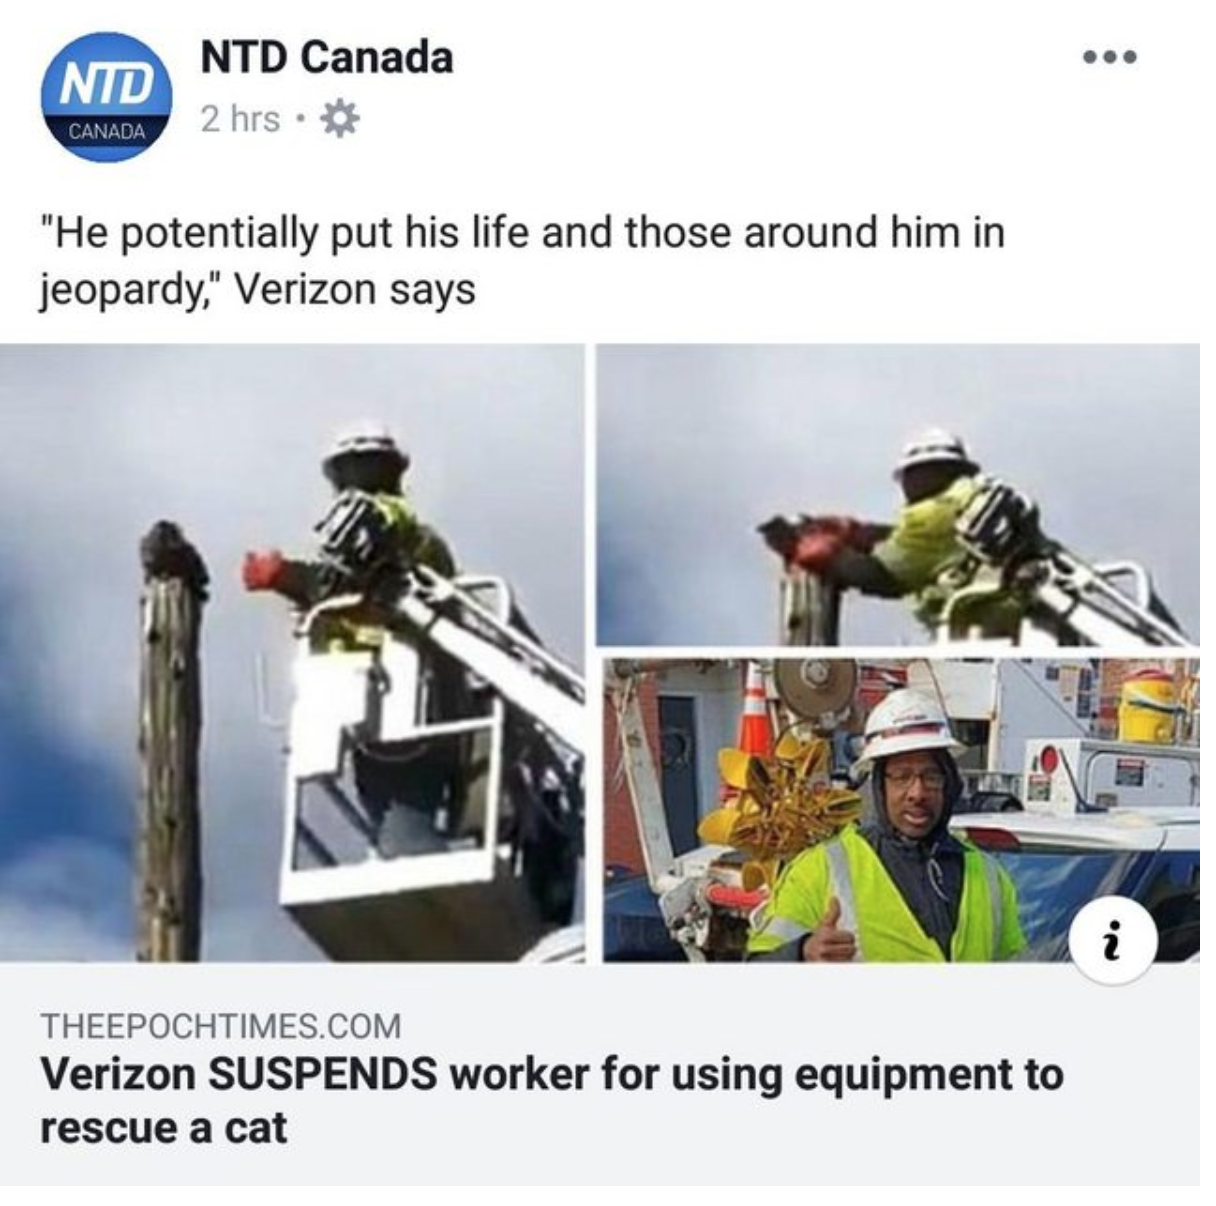 machine - Nid Canada Ntd Canada 2 hrs. "He potentially put his life and those around him in jeopardy," Verizon says Theepochtimes.Com Verizon Suspends worker for using equipment to rescue a cat